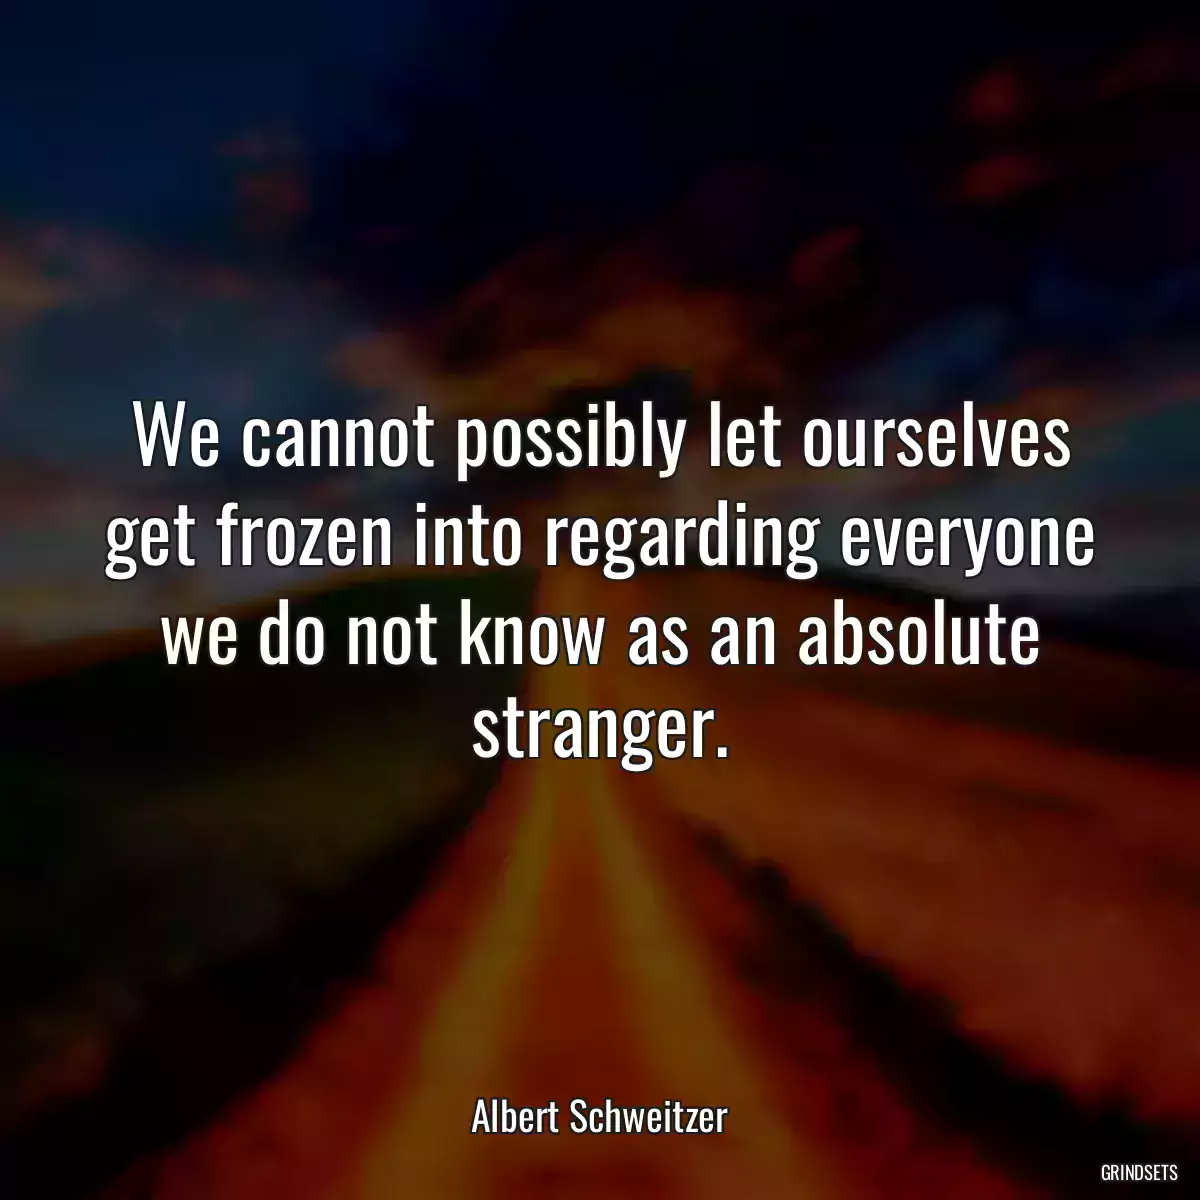 We cannot possibly let ourselves get frozen into regarding everyone we do not know as an absolute stranger.